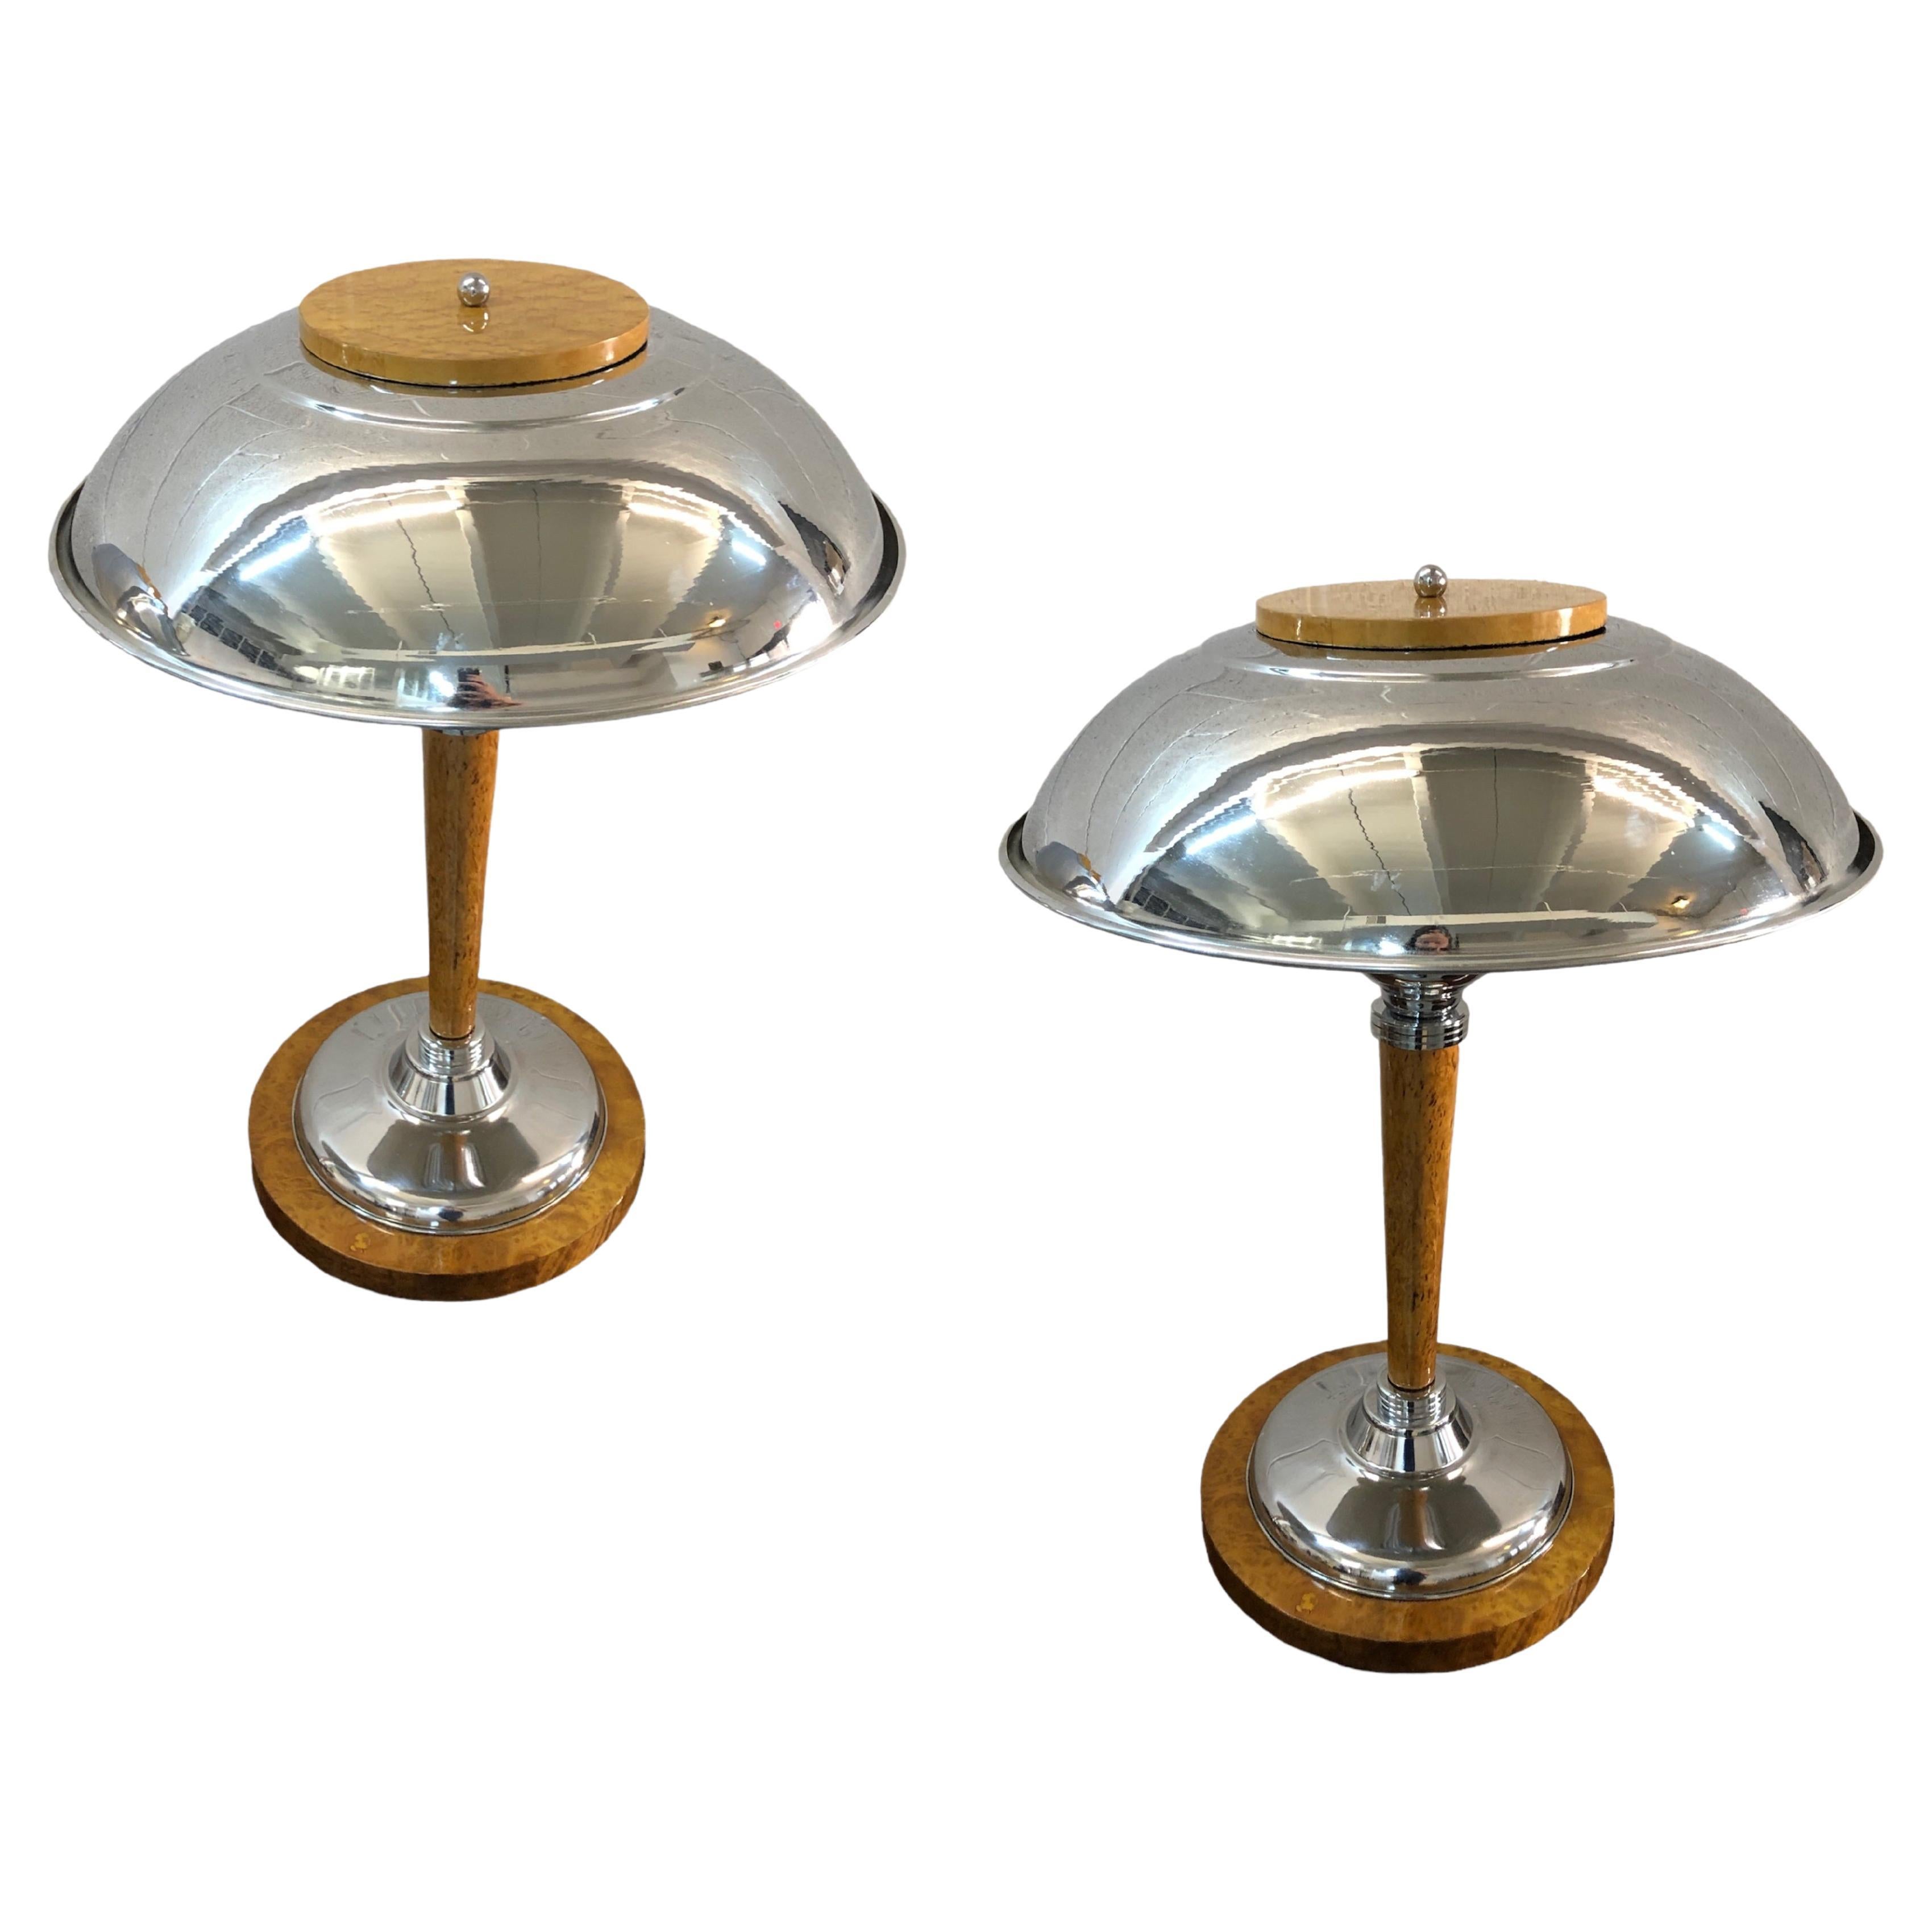 Pair of Art Deco Table Lamps in wood and chrome, 1920, France For Sale